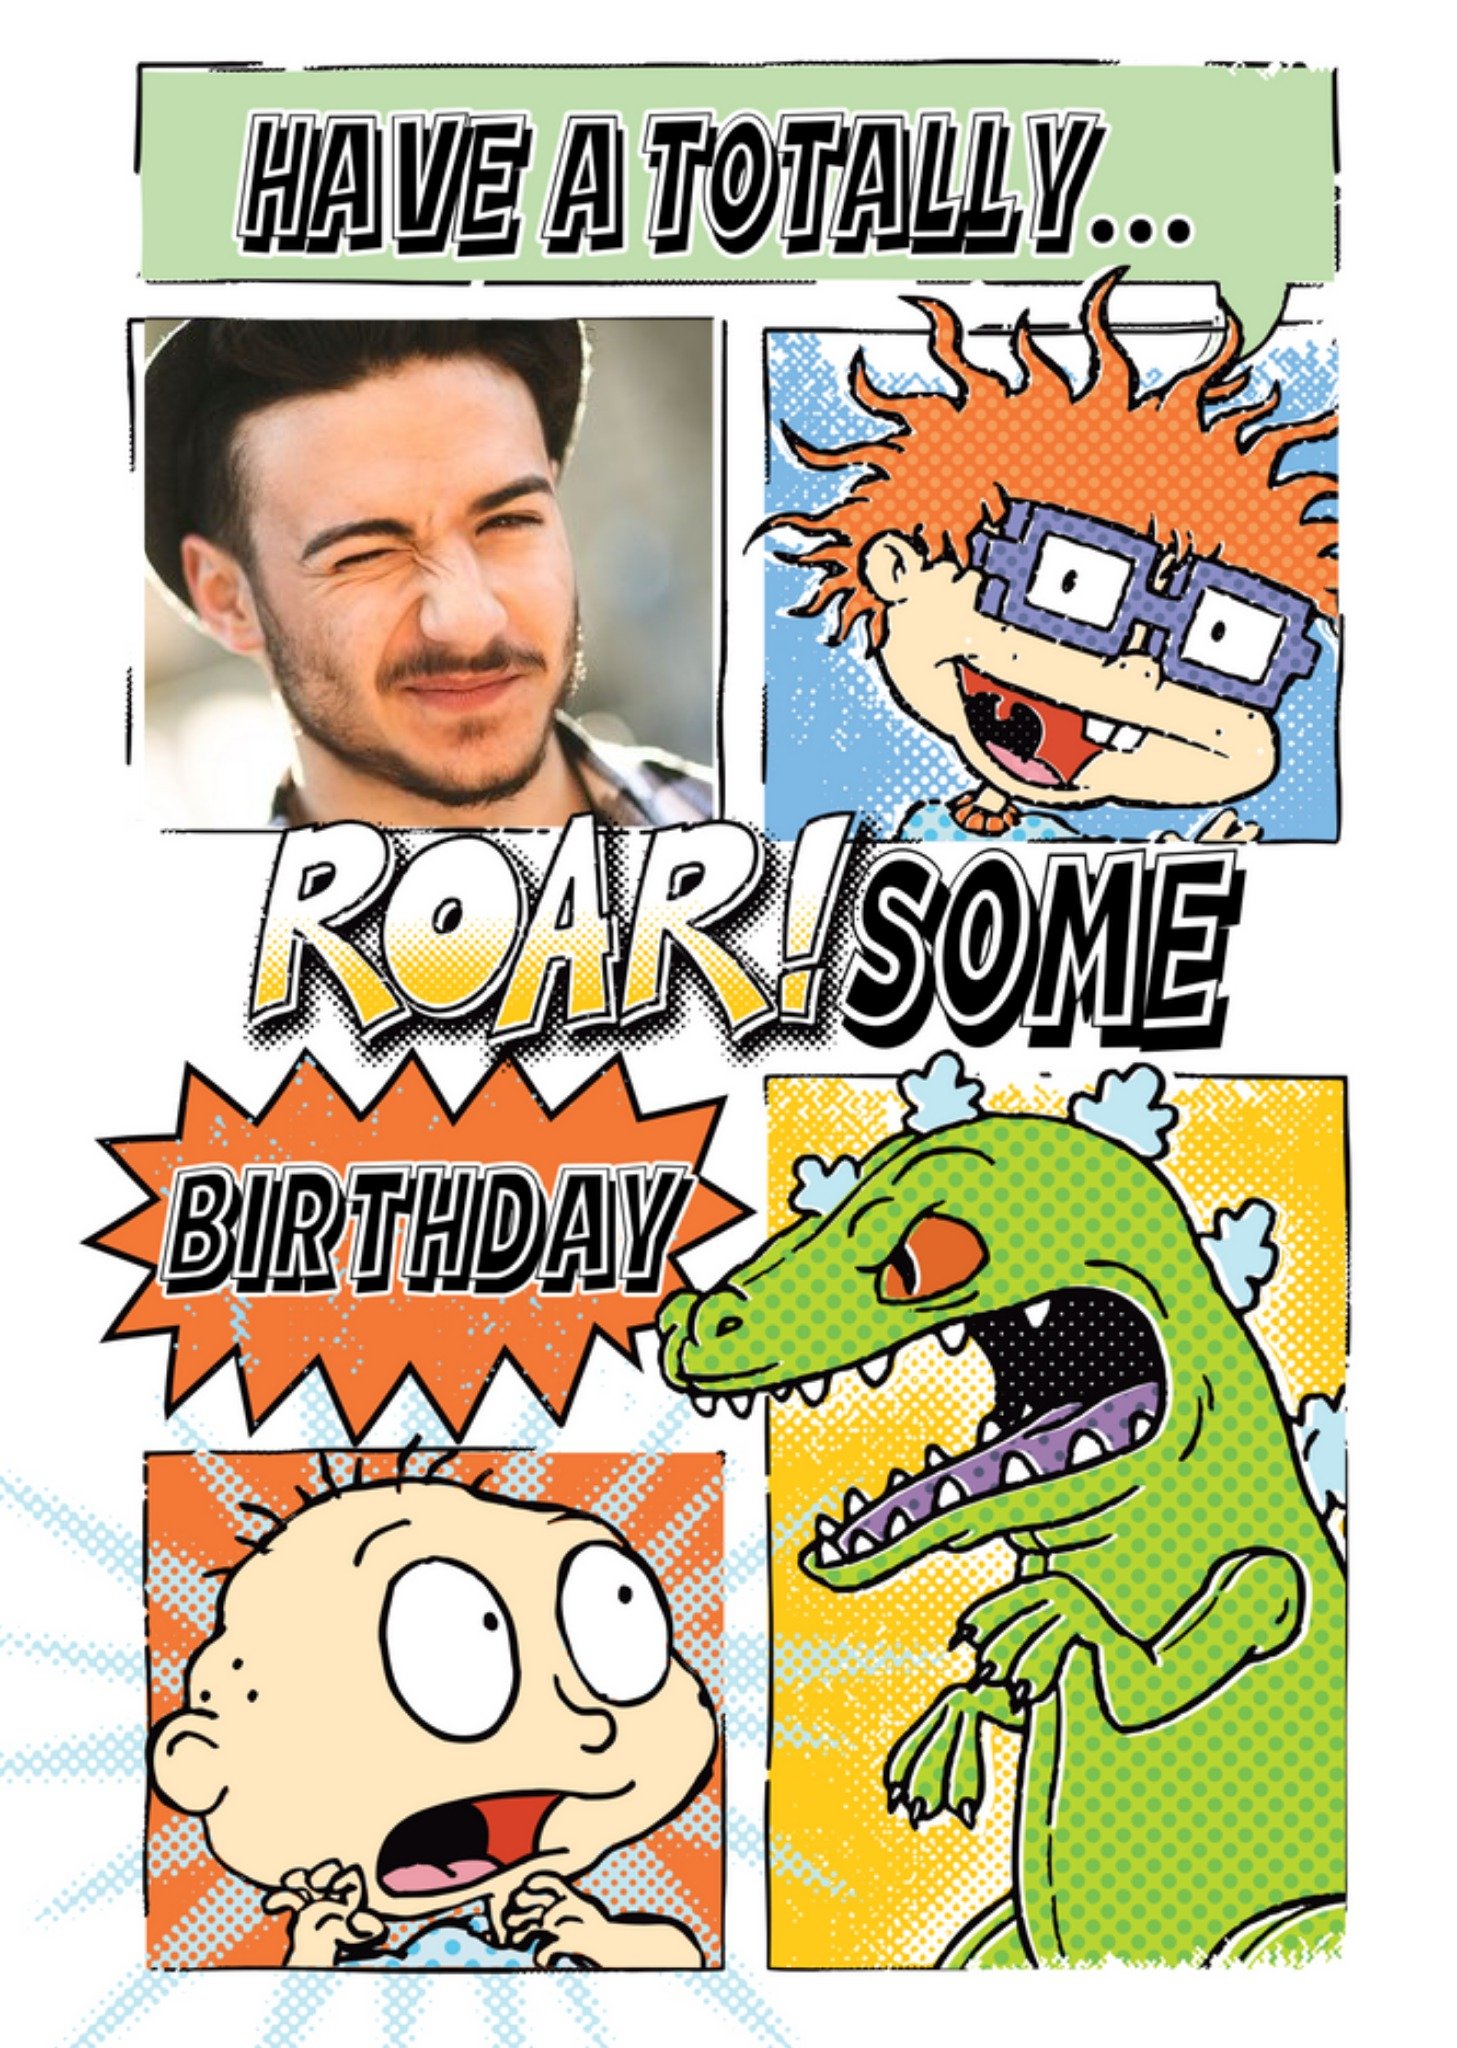 Nickelodeon Rugrats Totally Roar Some Photo Upload Birthday Card, Large